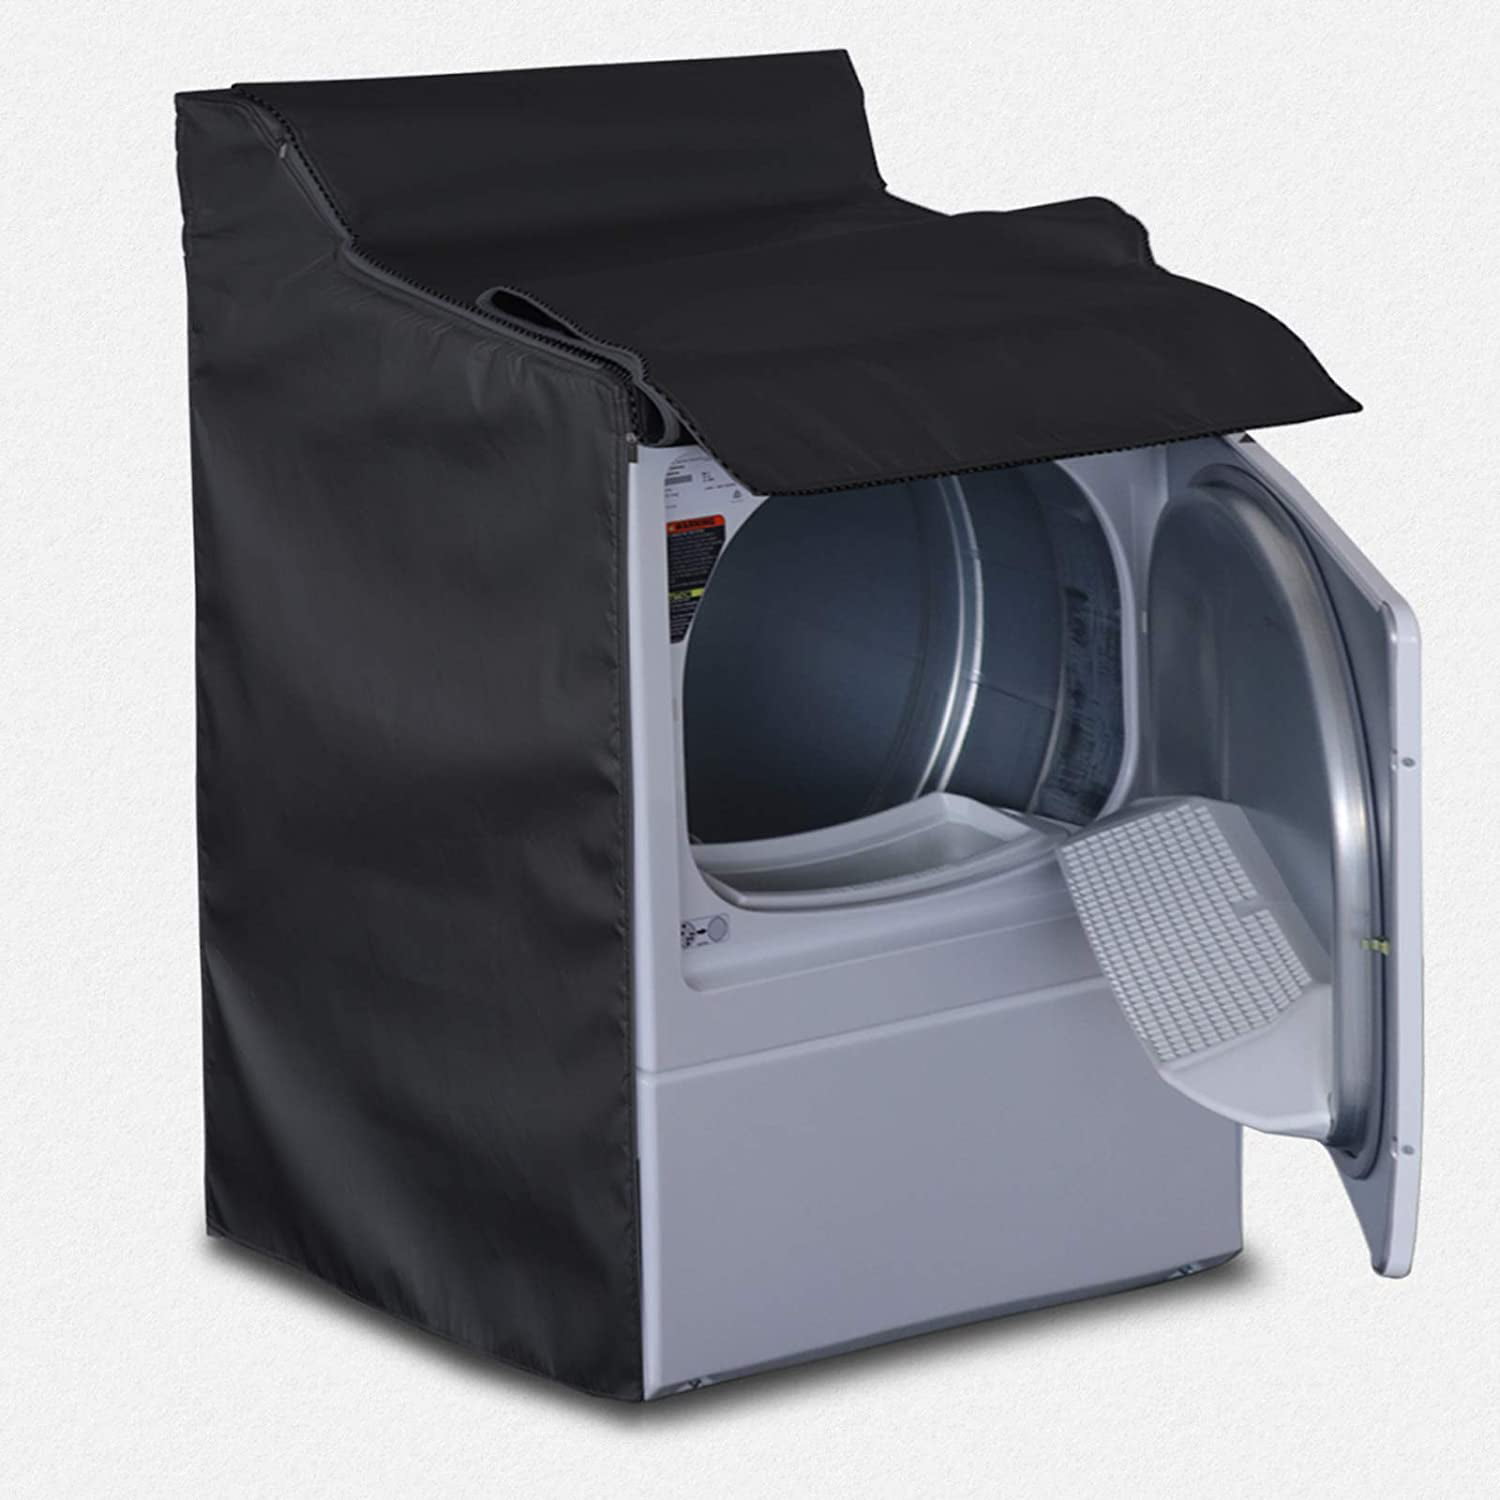 Washing Machine Cover Waterproof Washer Cover Fit For Front Load Washer/ Dryer 